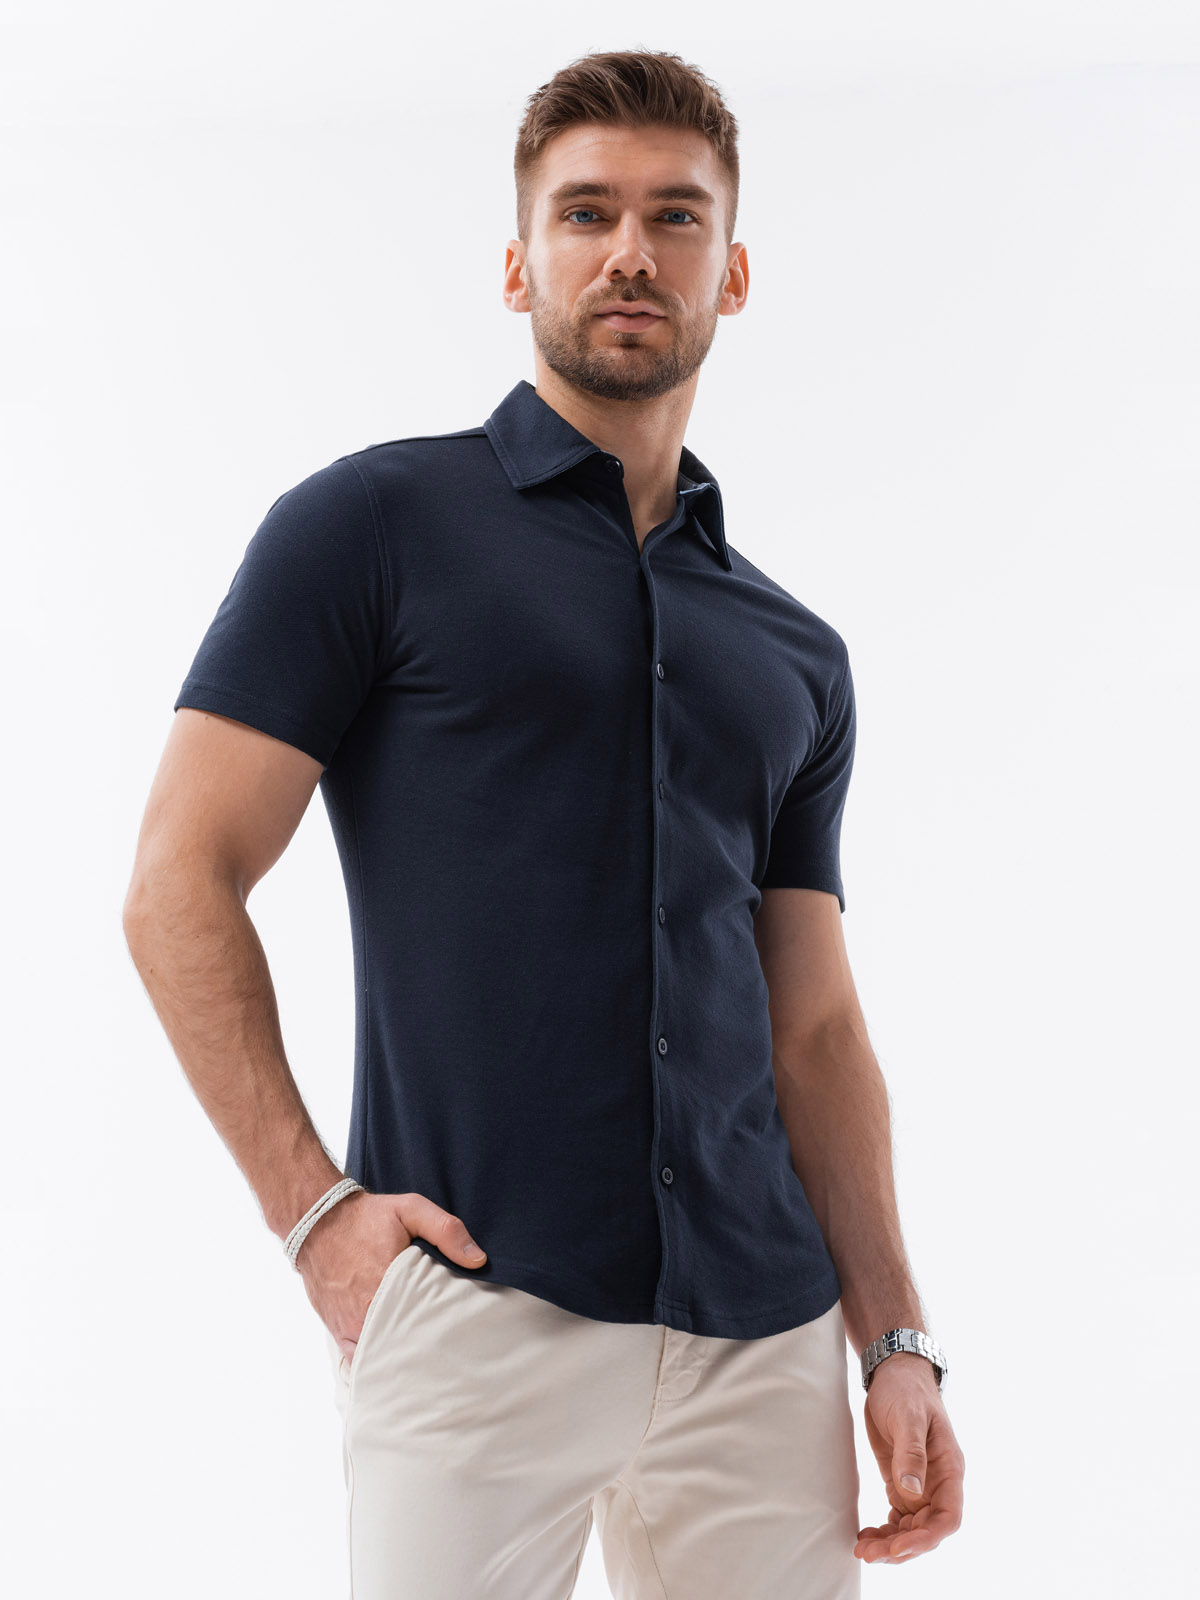 Ombre Men's slim fit knit shirt with short sleeves and collar - navy blue